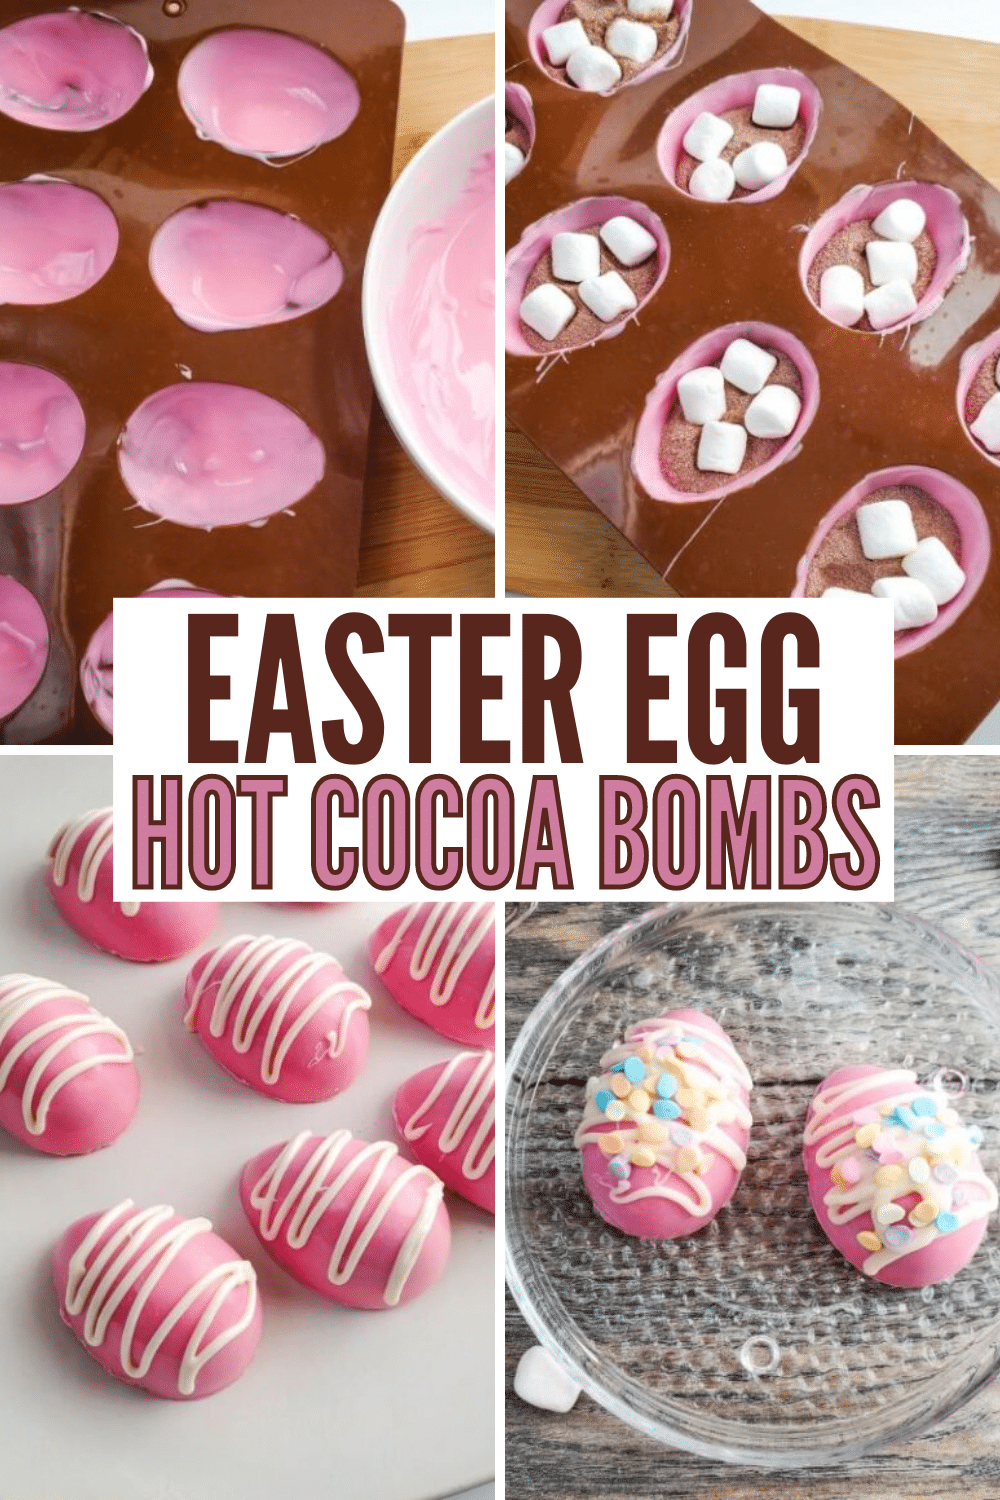 These Easter Egg Hot Cocoa Bombs make a fun and tasty addition to any Easter basket. Sweet, colorful, and festive! #easter #hotcocobombs #hotcocoa #easteregg via @wondermomwannab